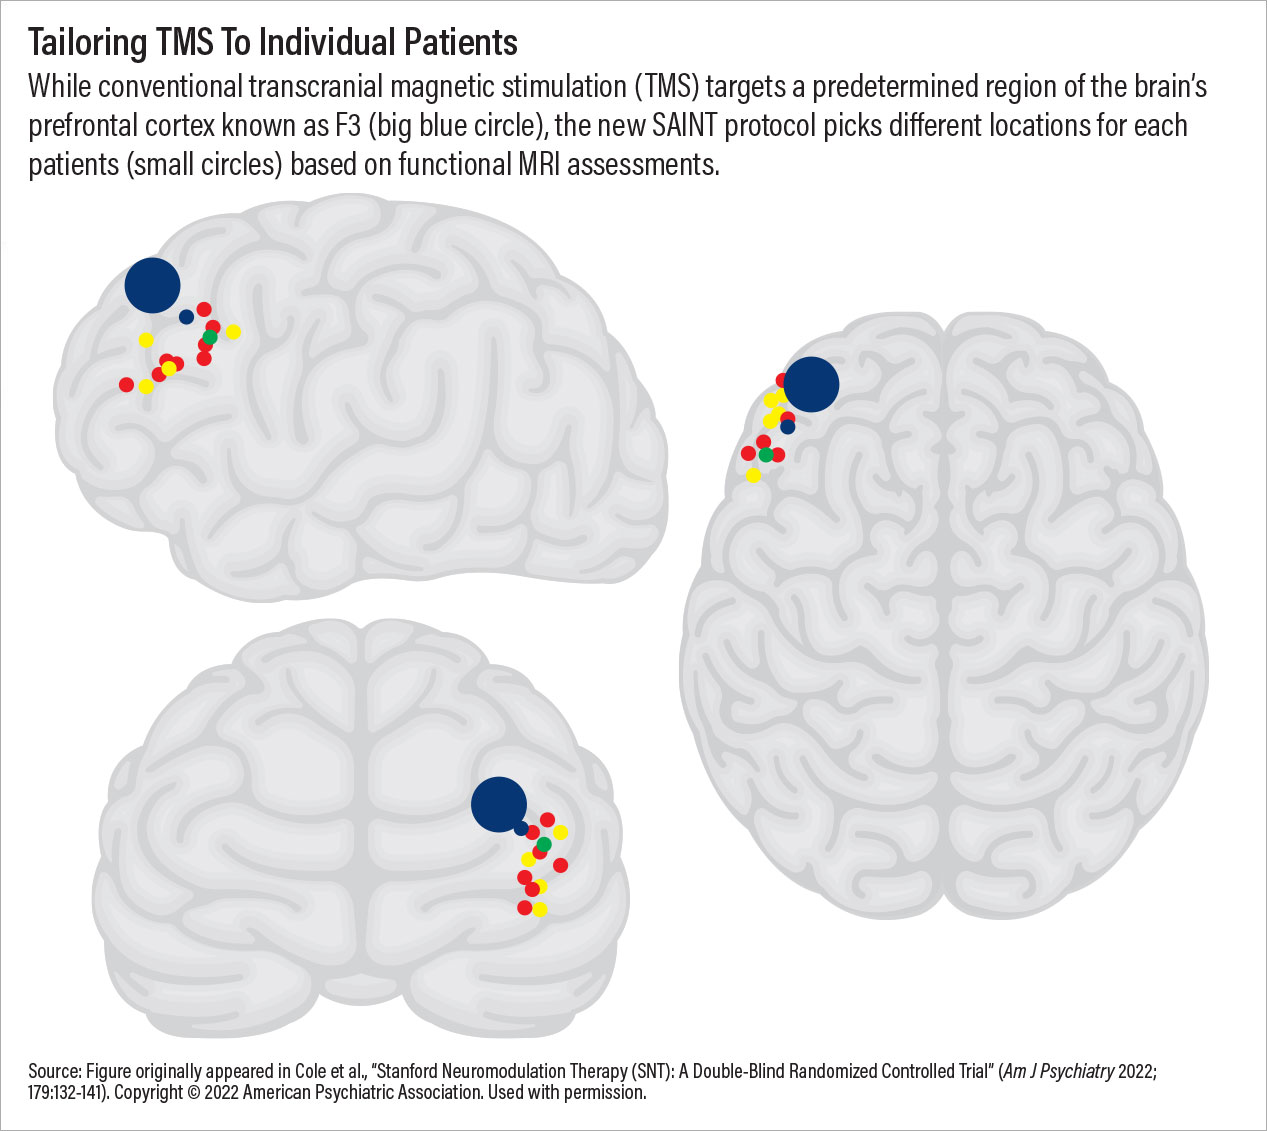 Photo: Tayloring TMS to Individual Patients